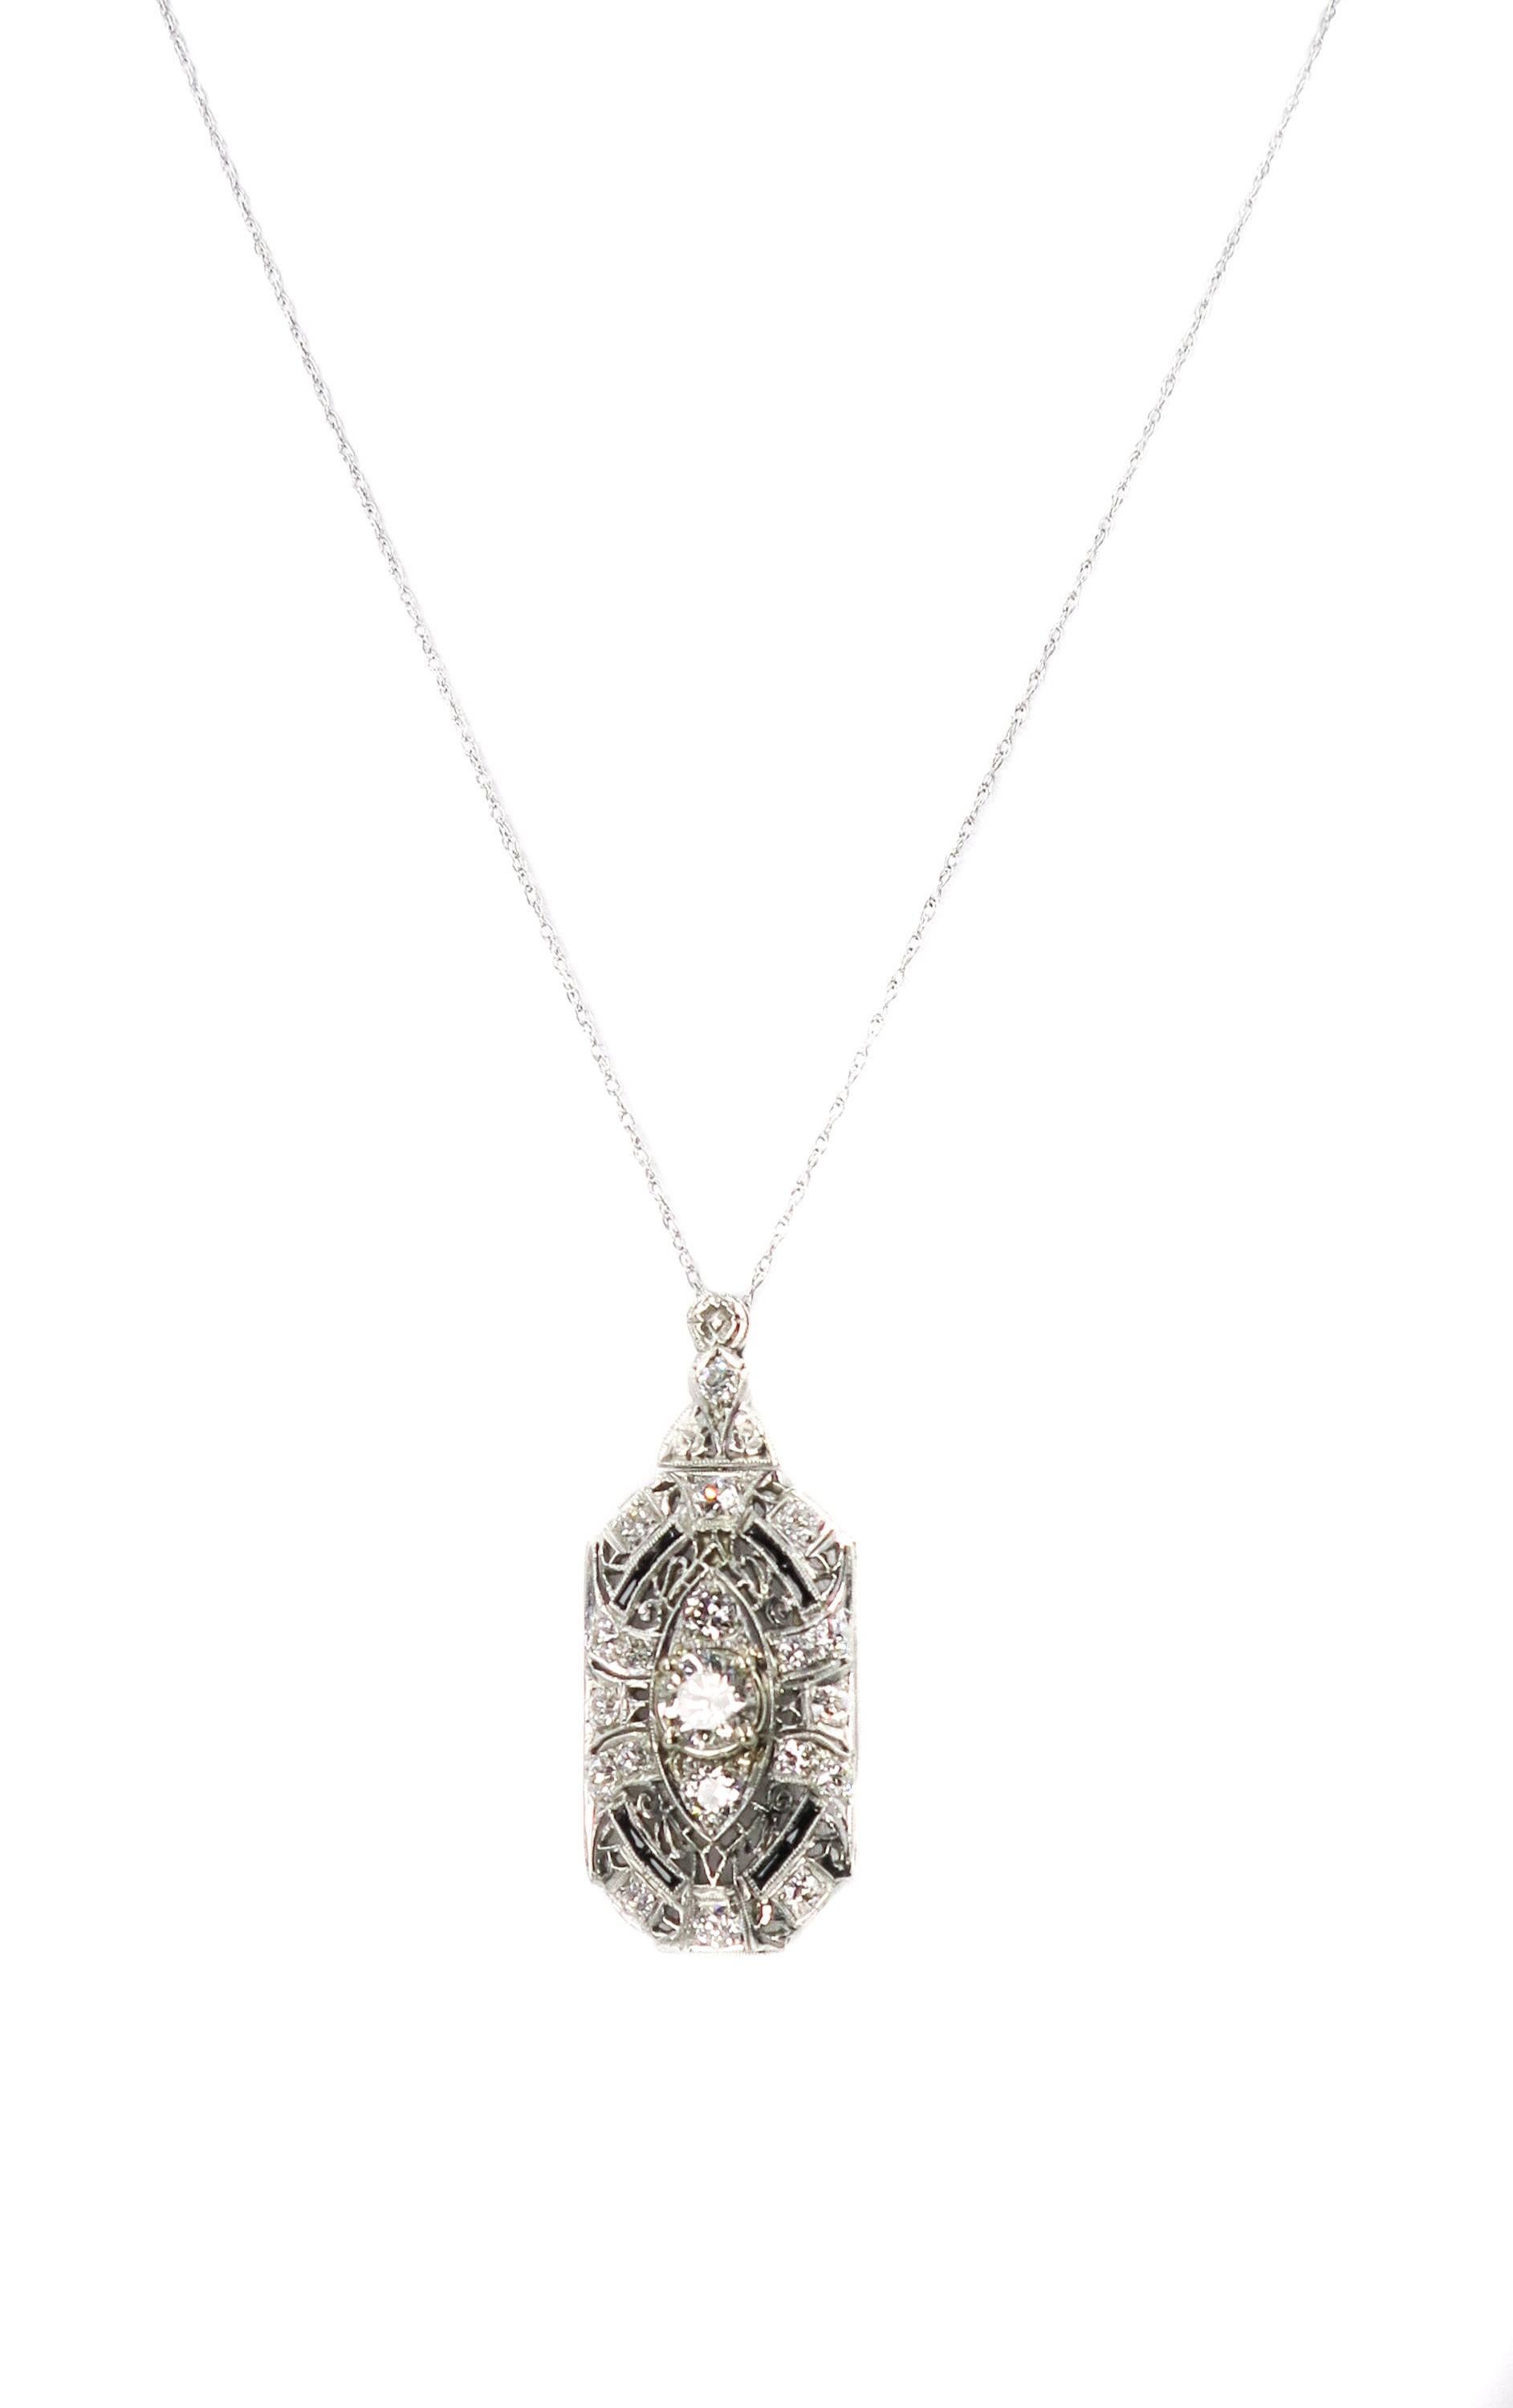 This gorgeous platinum brooch/pendant from the Art Deco era, is centered with a sparkling old mine cut diamond weighing approximately 1.00ct. and smaller old mine cut diamonds weighing approximately 1.25 carats total. The diamond are graded H-I